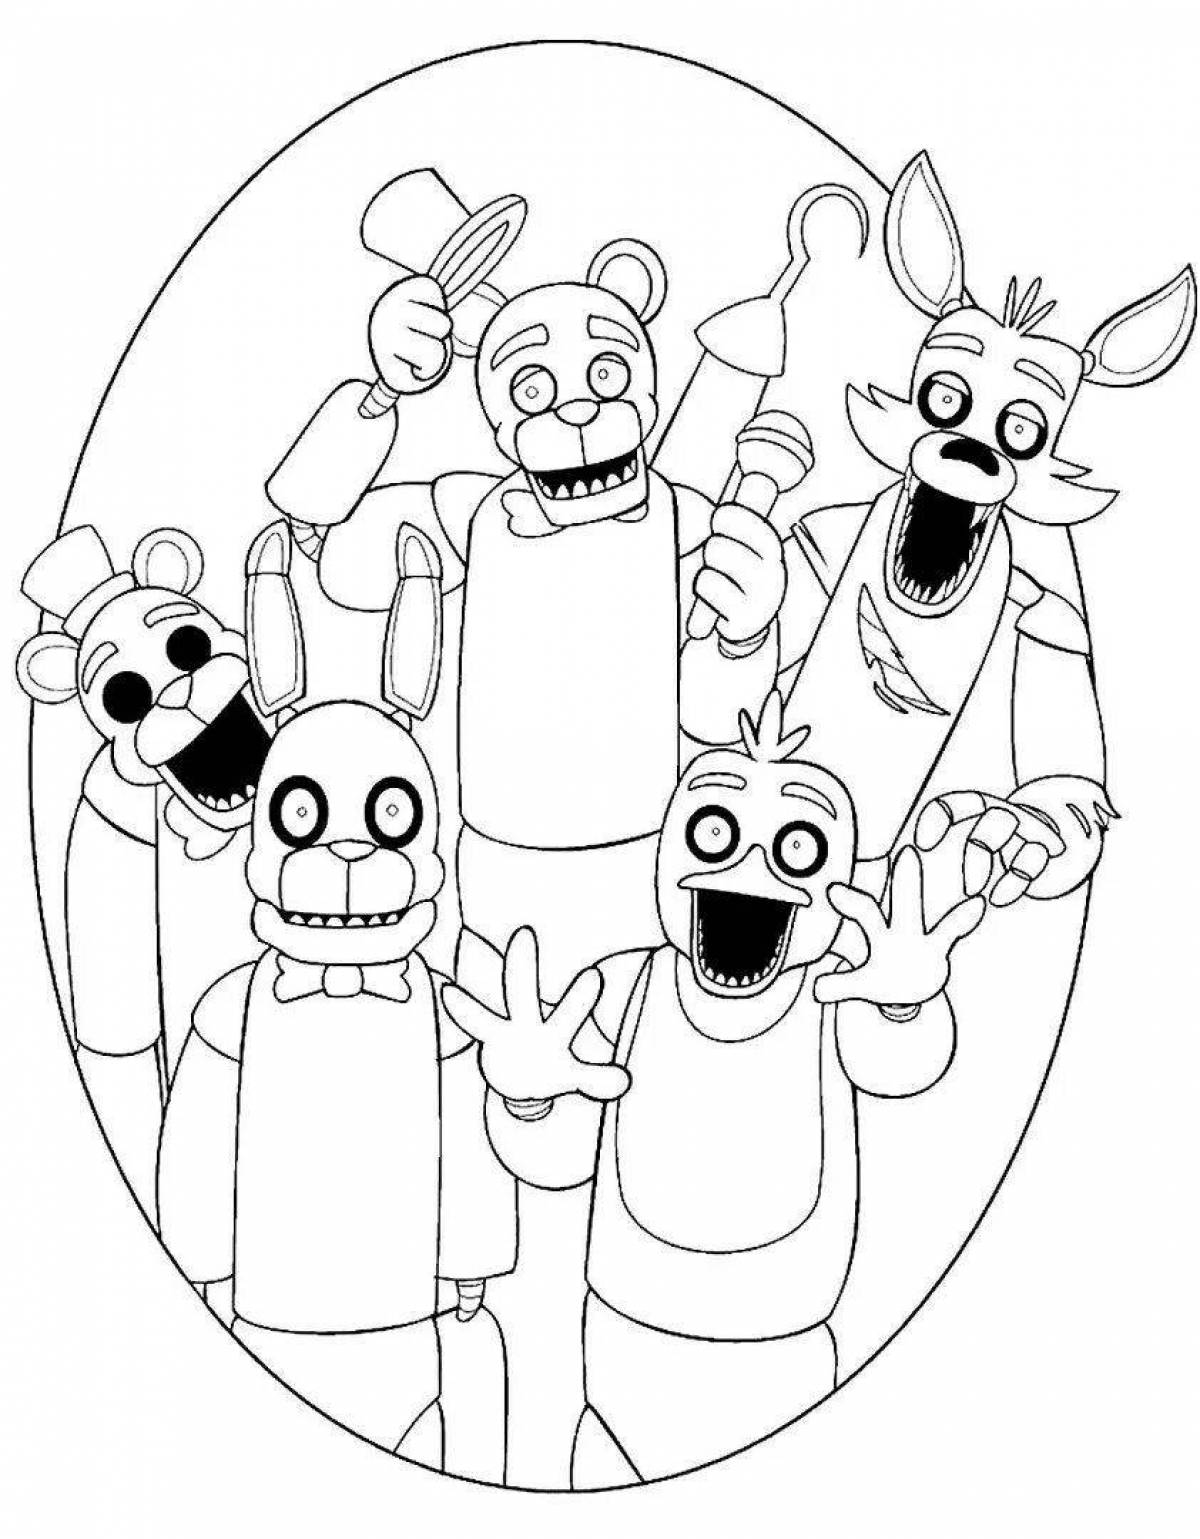 Majestic fnaf 7 coloring page